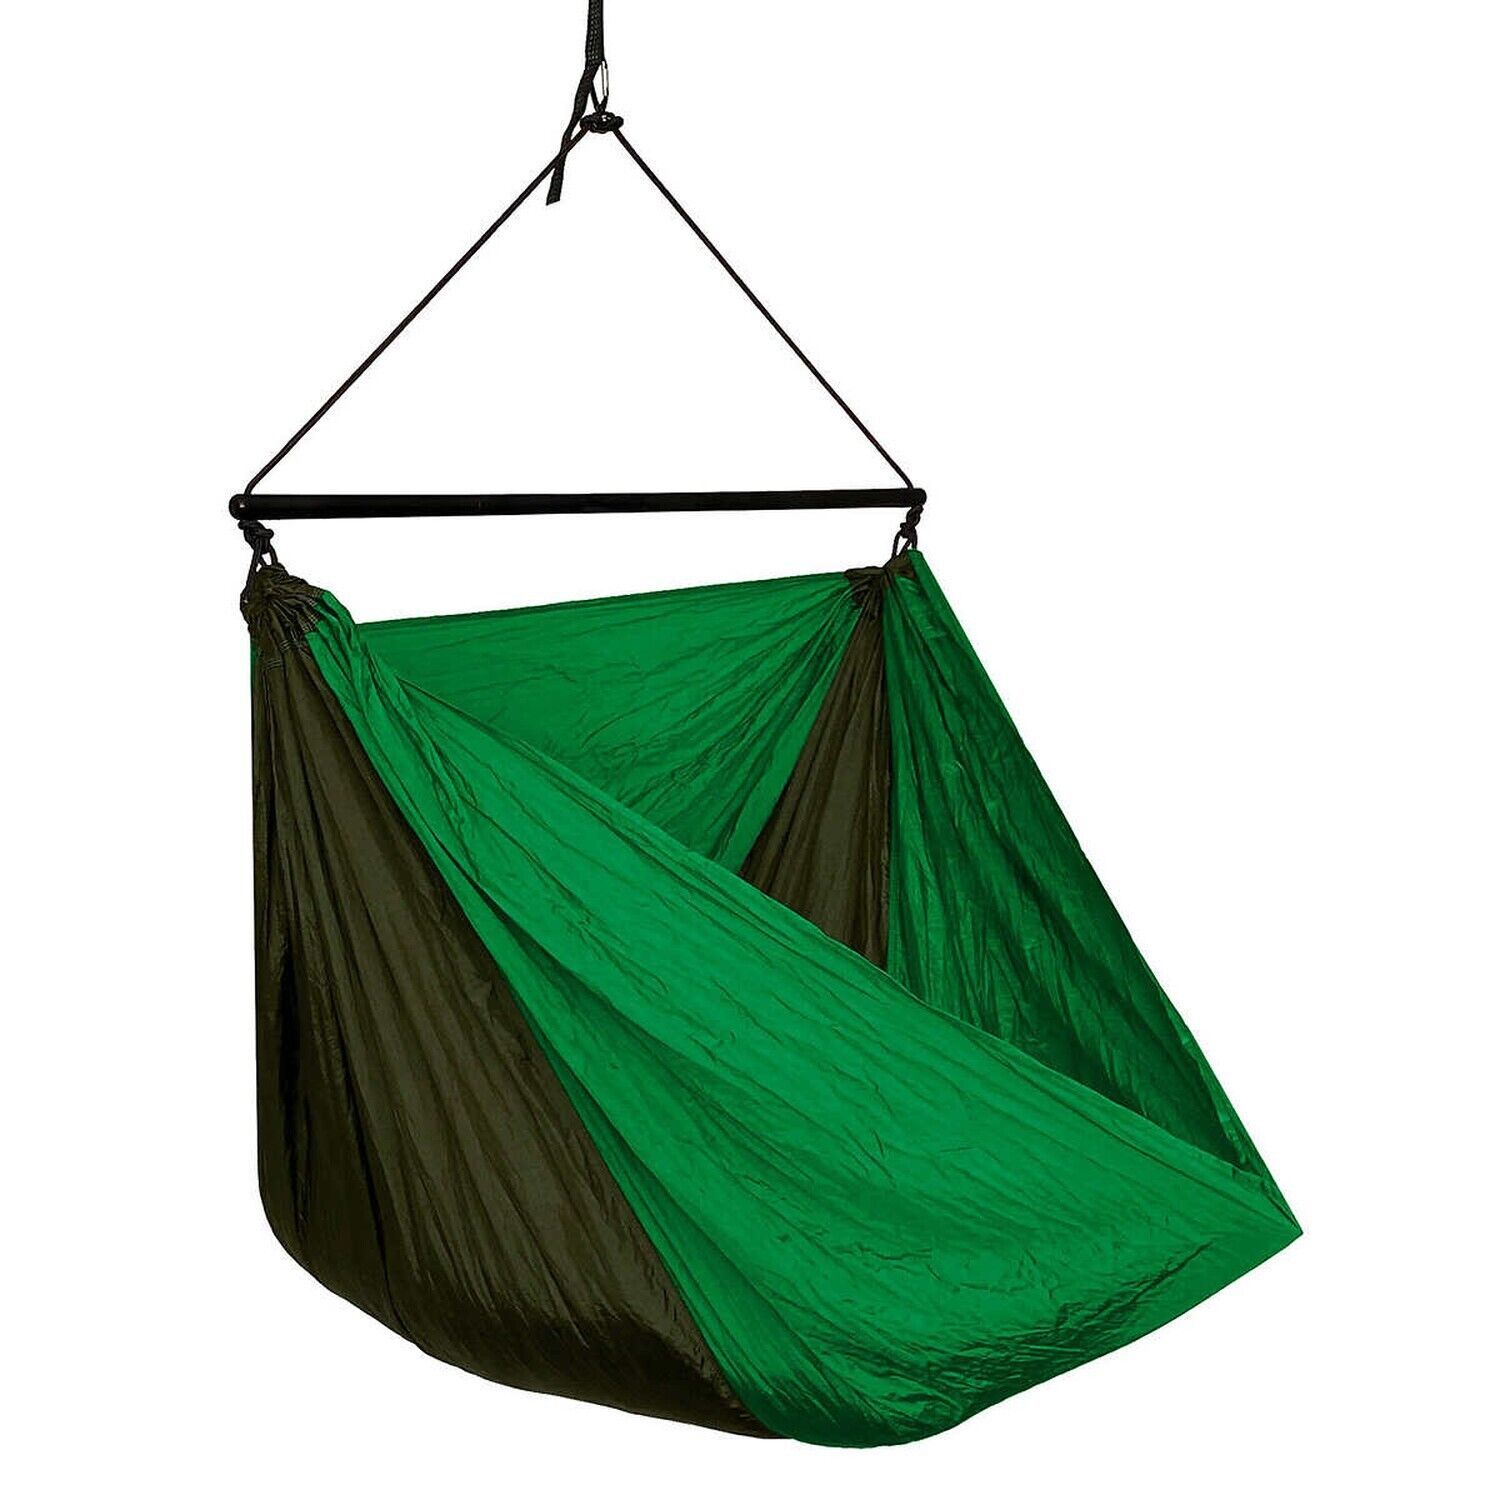 HAMMOCK HANGING CHAIR SWING FOR OUTSIDE PATIO OUTDOOR CAMPING PORCH PORTABLE NEW - $34.99